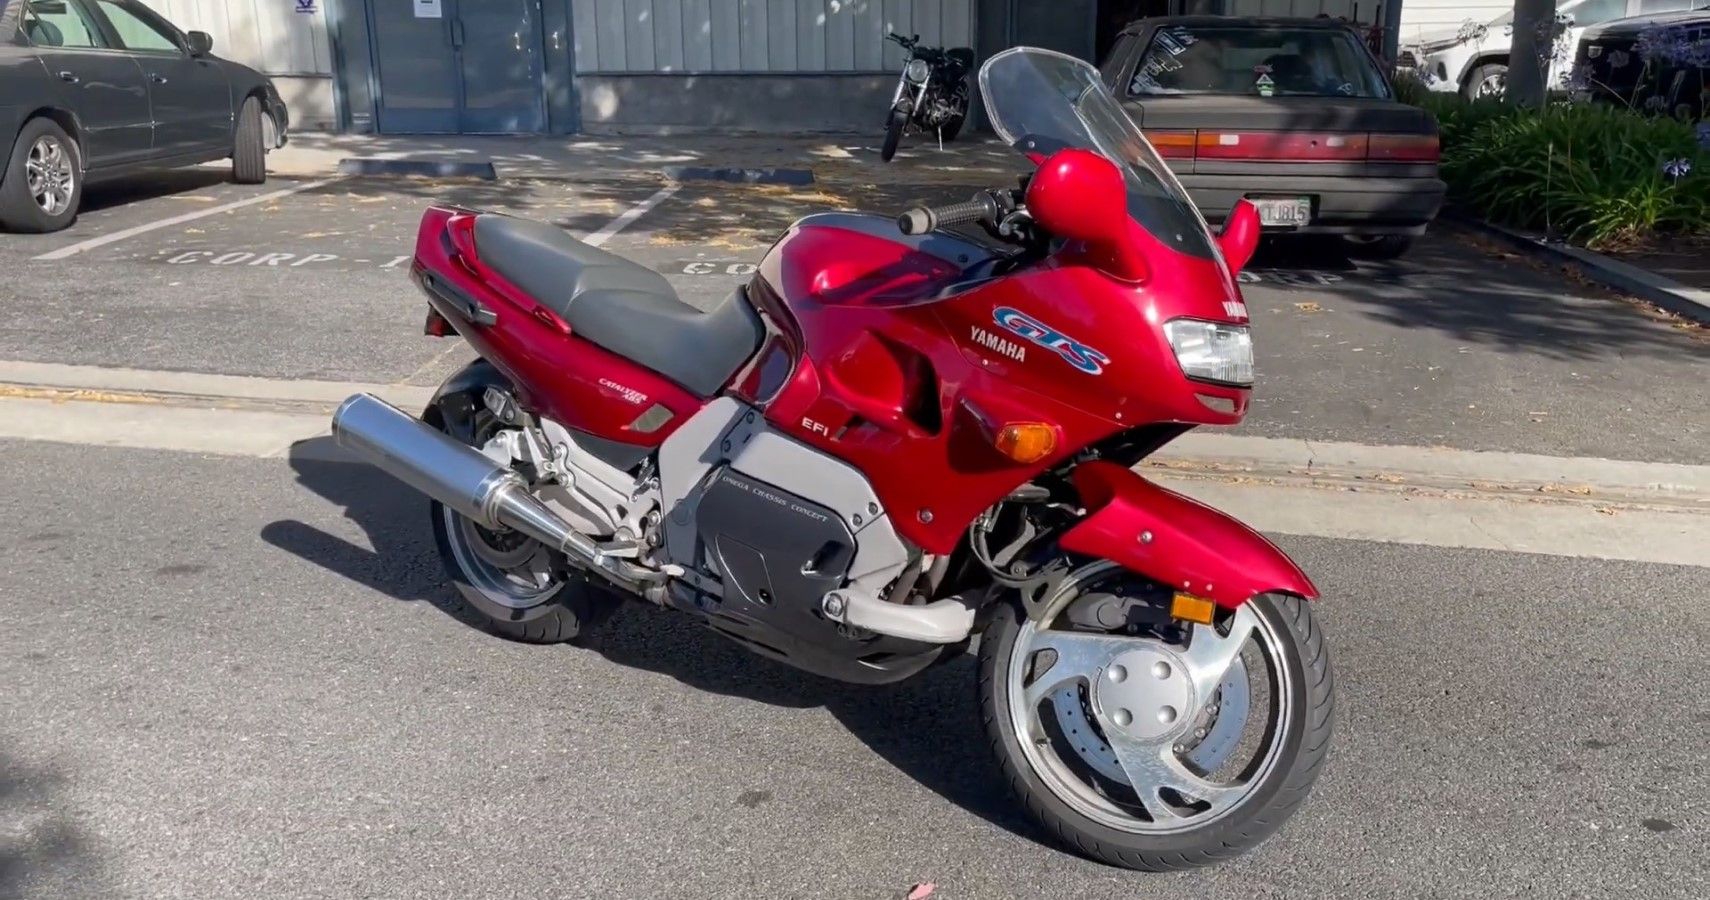 1990 Yamaha GTS1000 in red front third quarter view